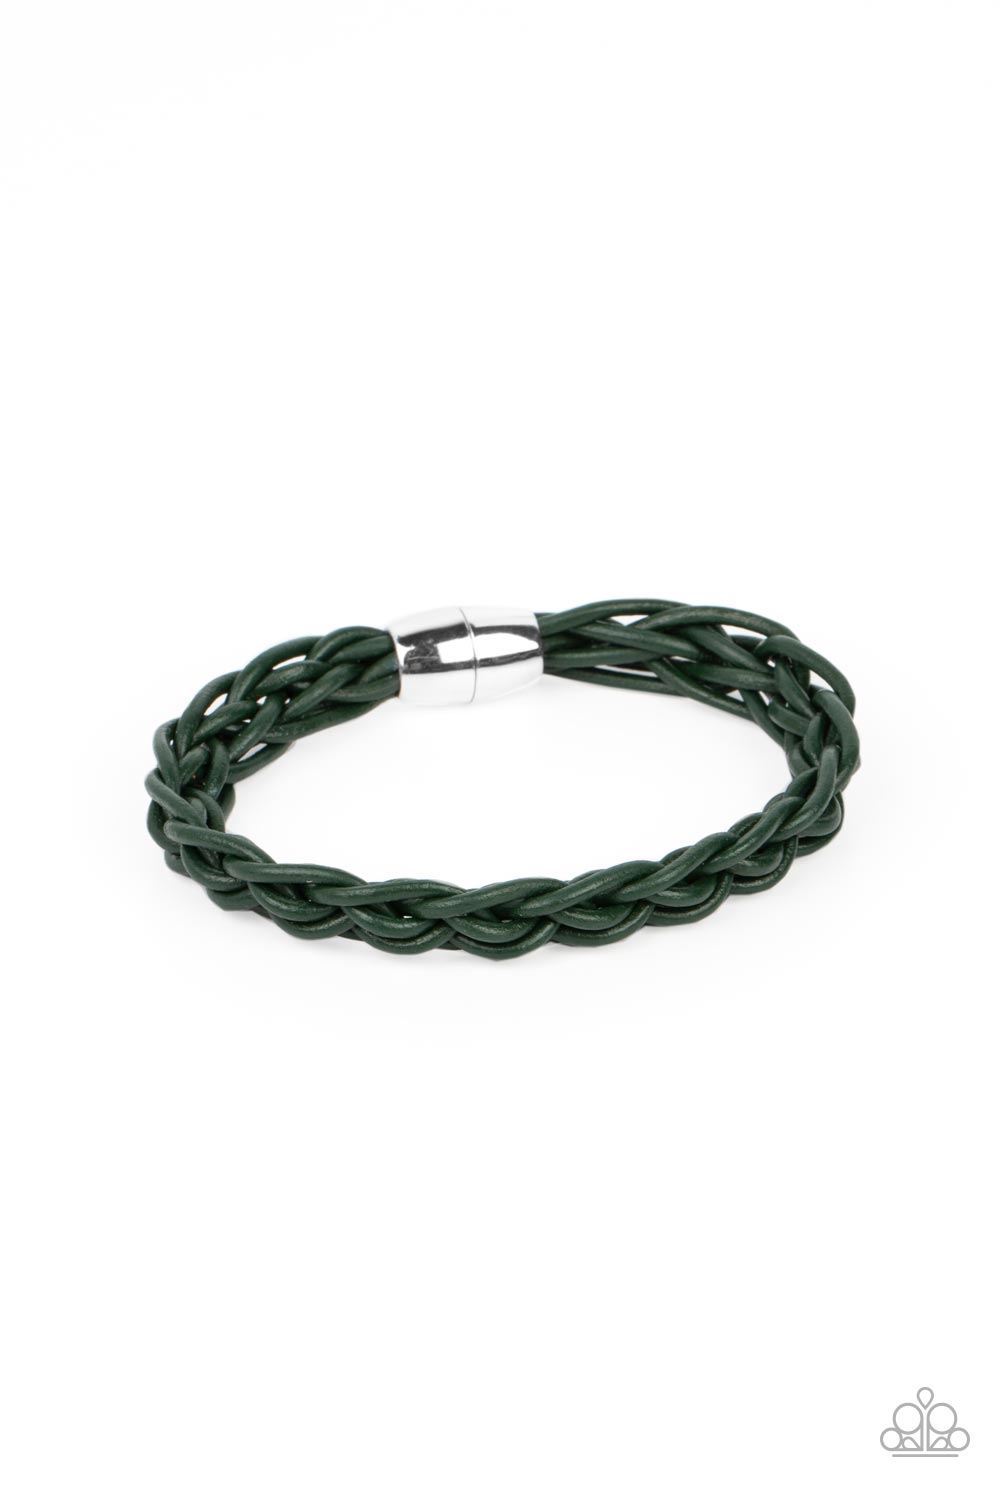 Cattle Ranch Green Leather Bracelet - Paparazzi Accessories- lightbox - CarasShop.com - $5 Jewelry by Cara Jewels